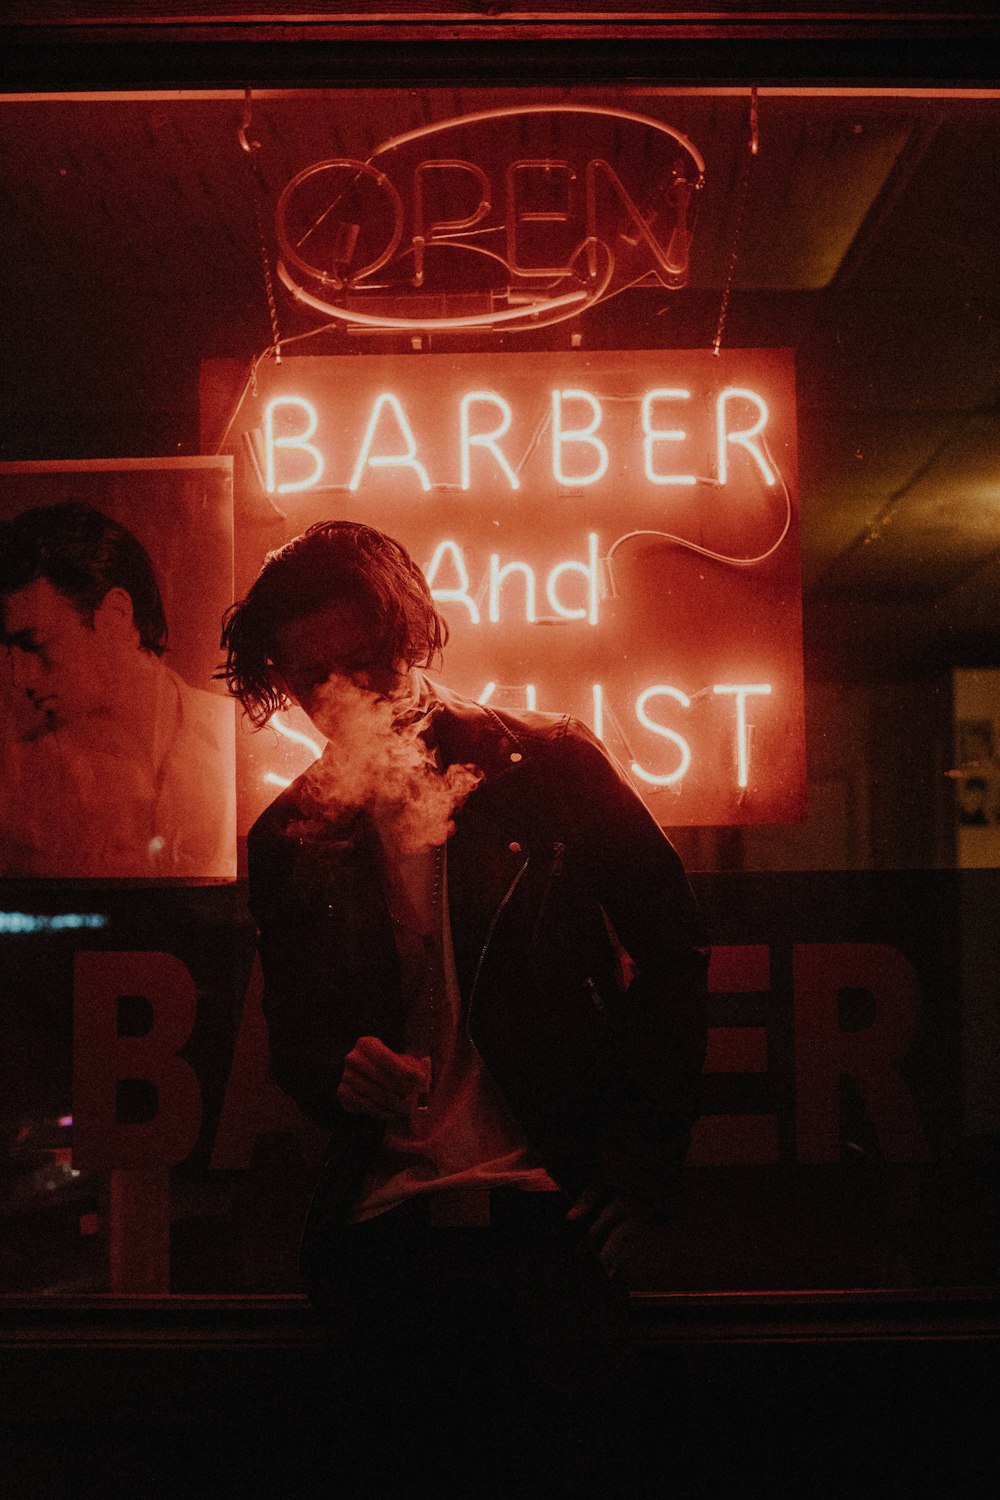 man smoking in front of barber neon light signage